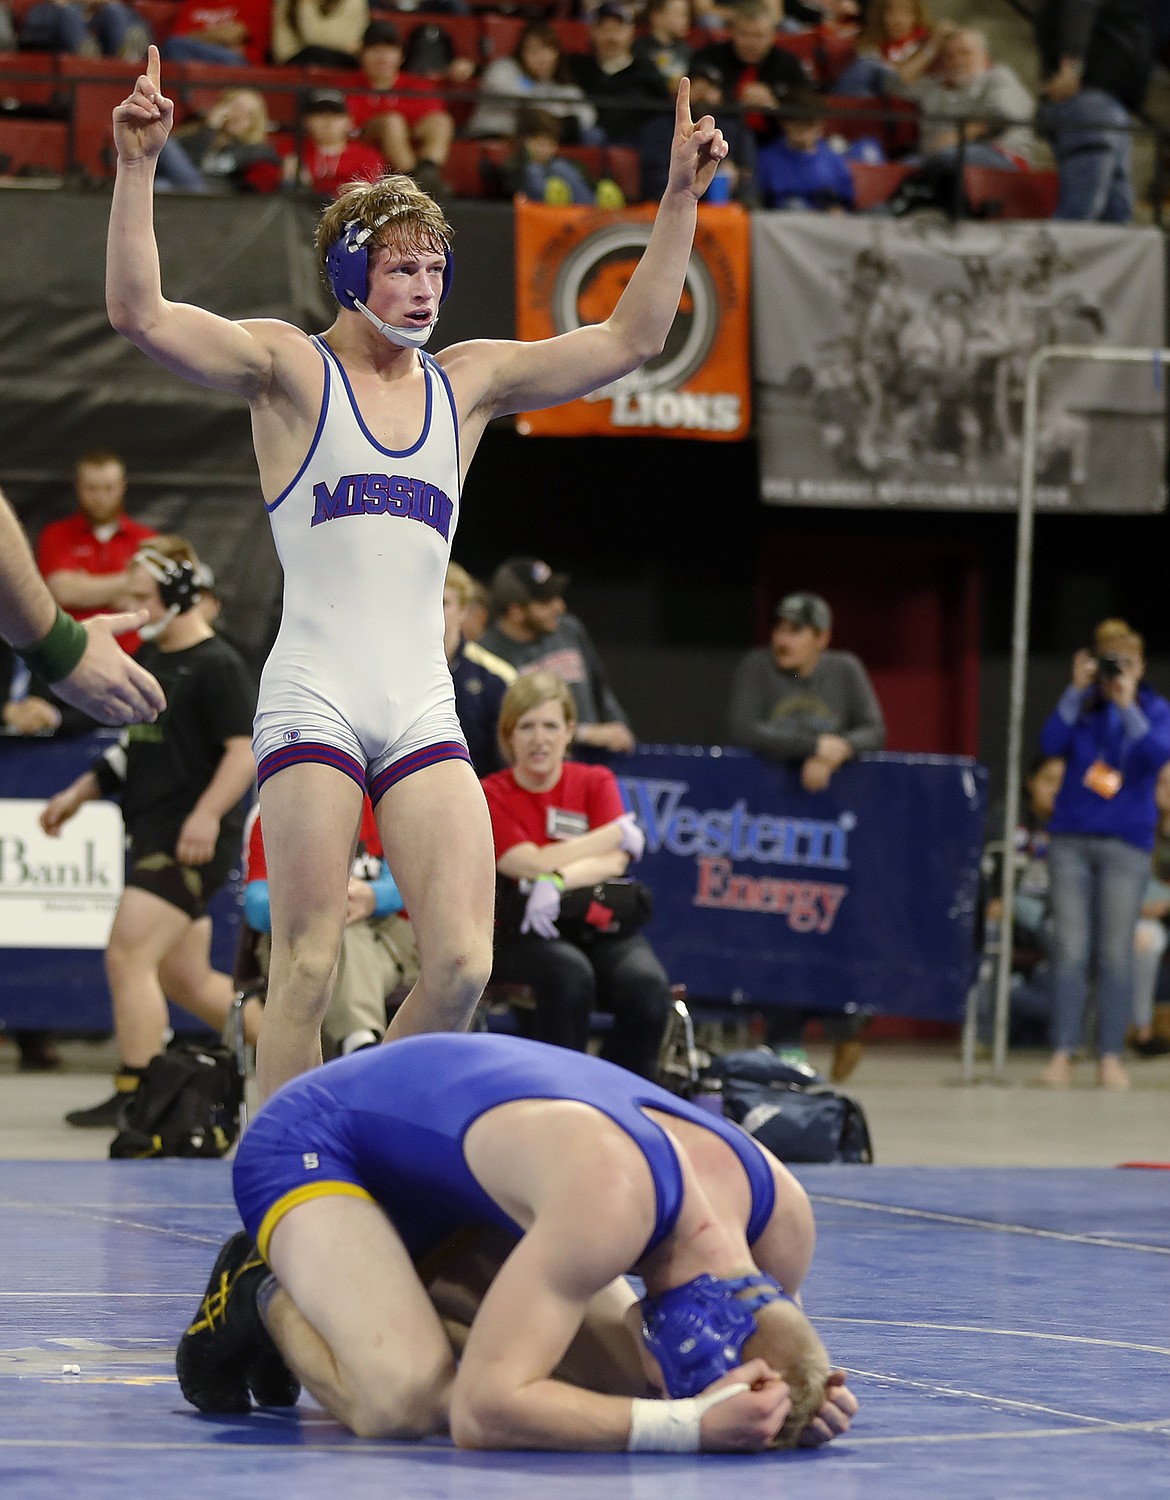 Isaiah Allik celebrates his win over Nate Gorham of Shepherd in the Class B-C 170-pound championship match at the 2020 state wrestling tournament. (Casey Page/Billings Gazette)